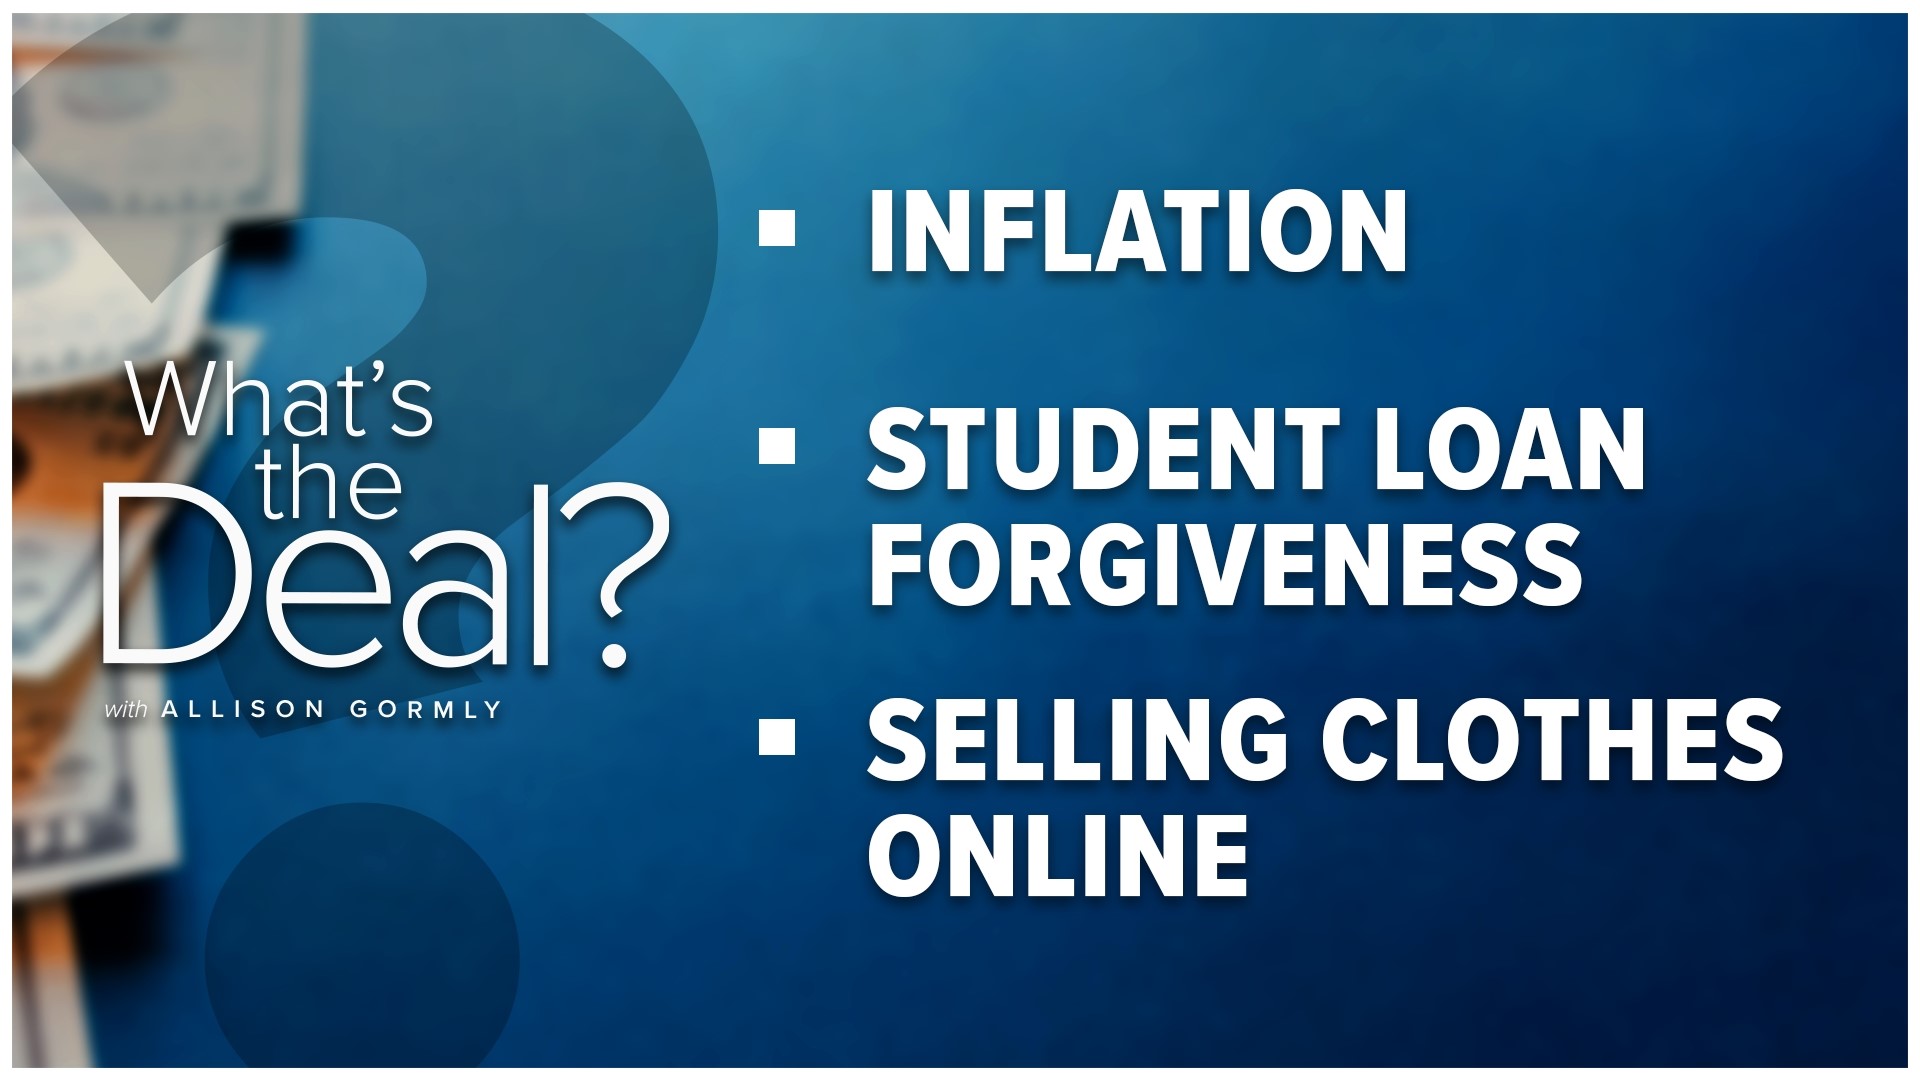 We tell you what's the deal with everything from inflation to student loan forgiveness.